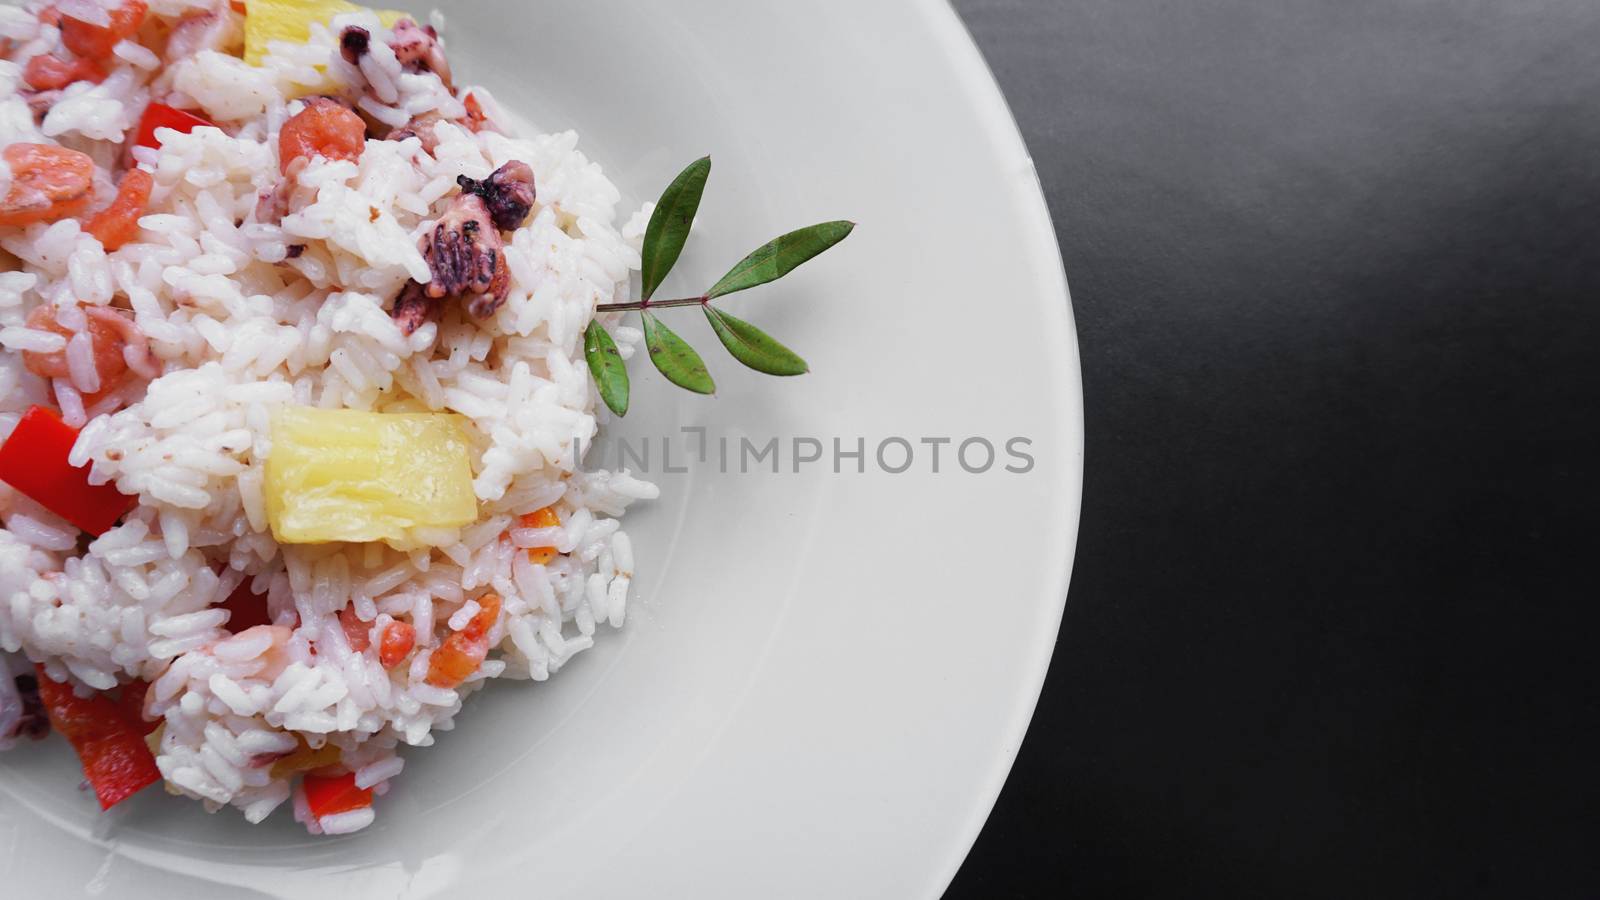 Rice with with shrimp and pineapple, thai or china food on white dish